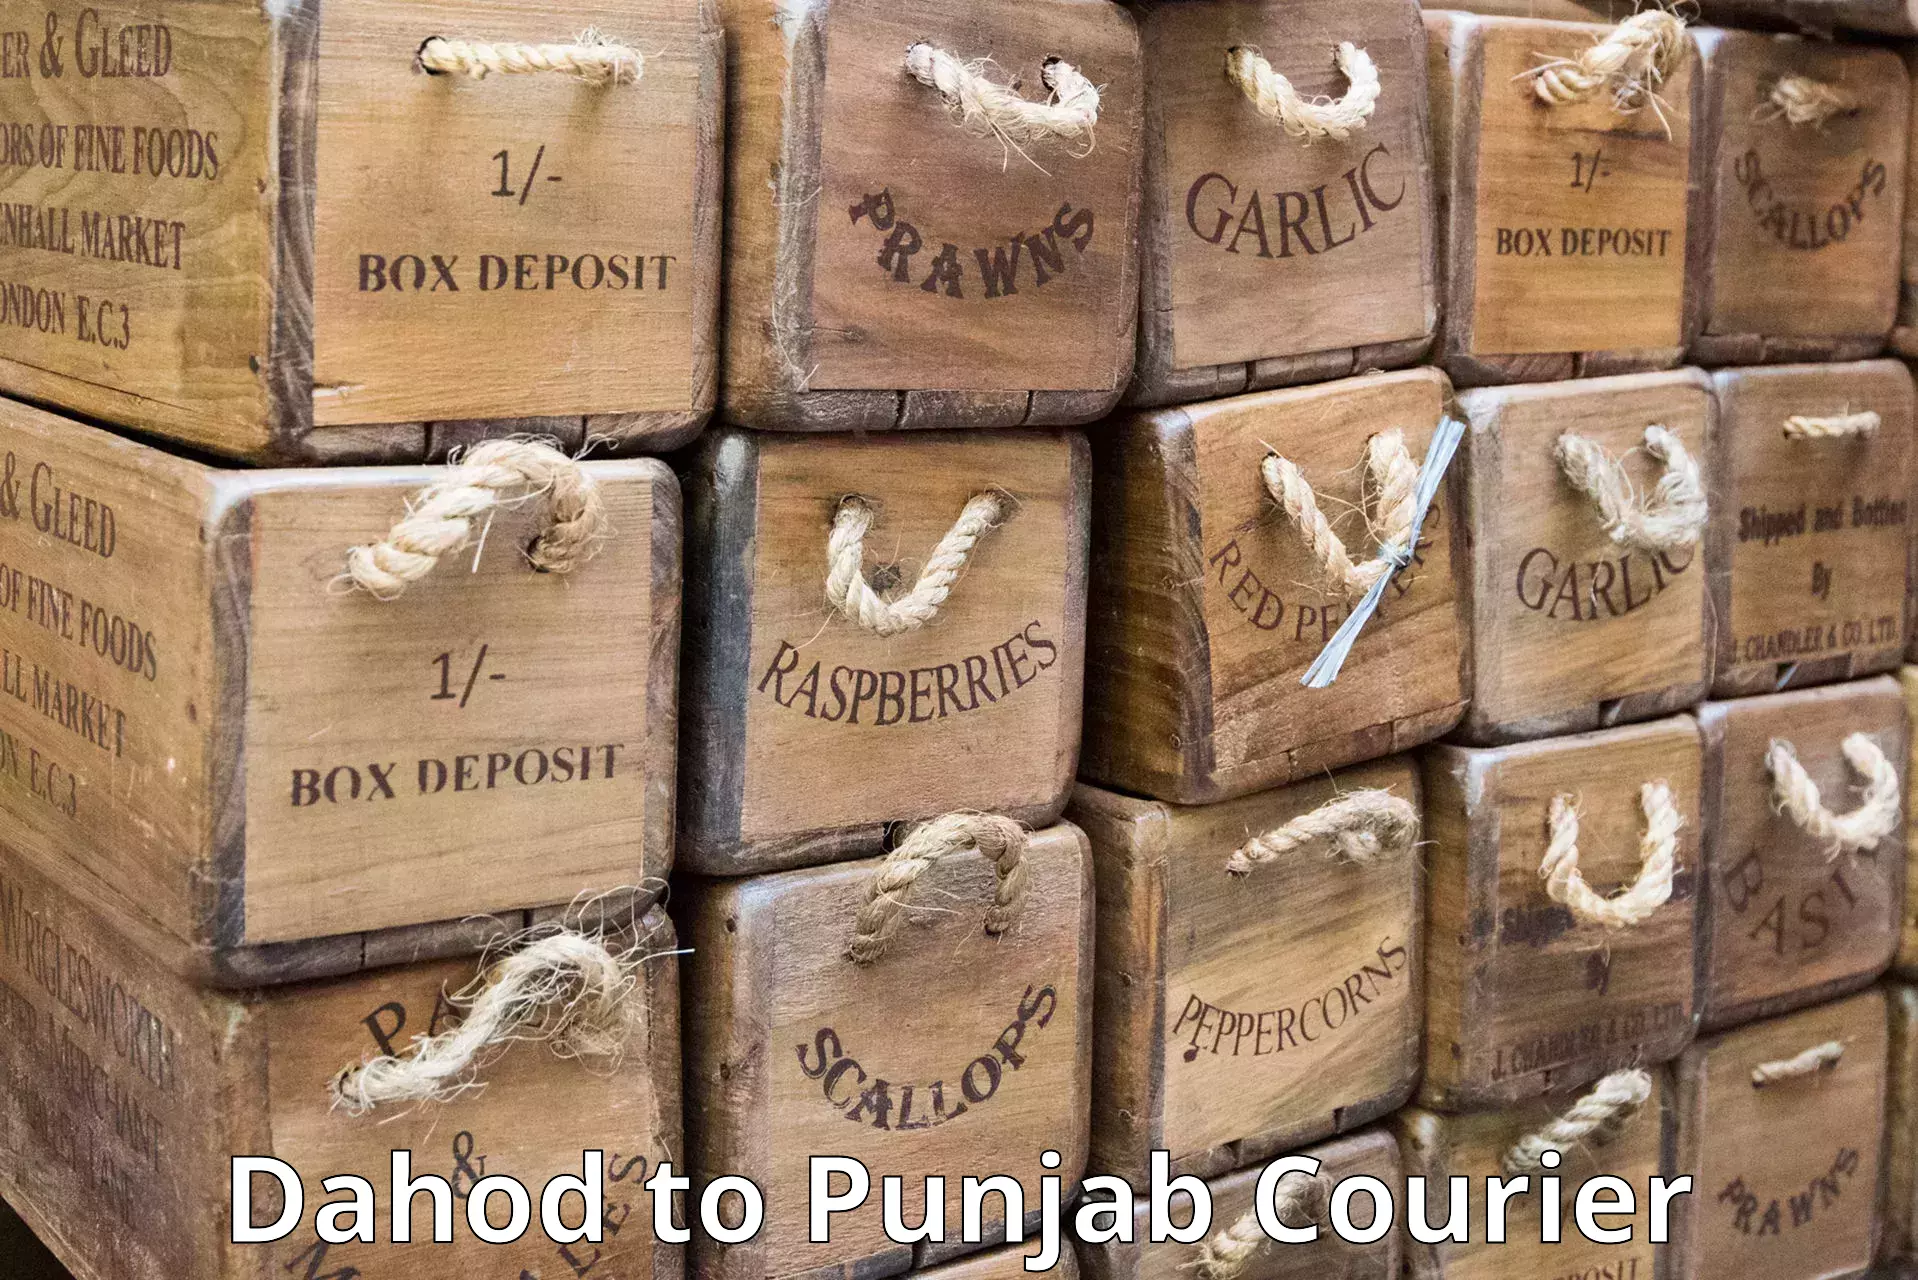 Global courier networks Dahod to Amritsar